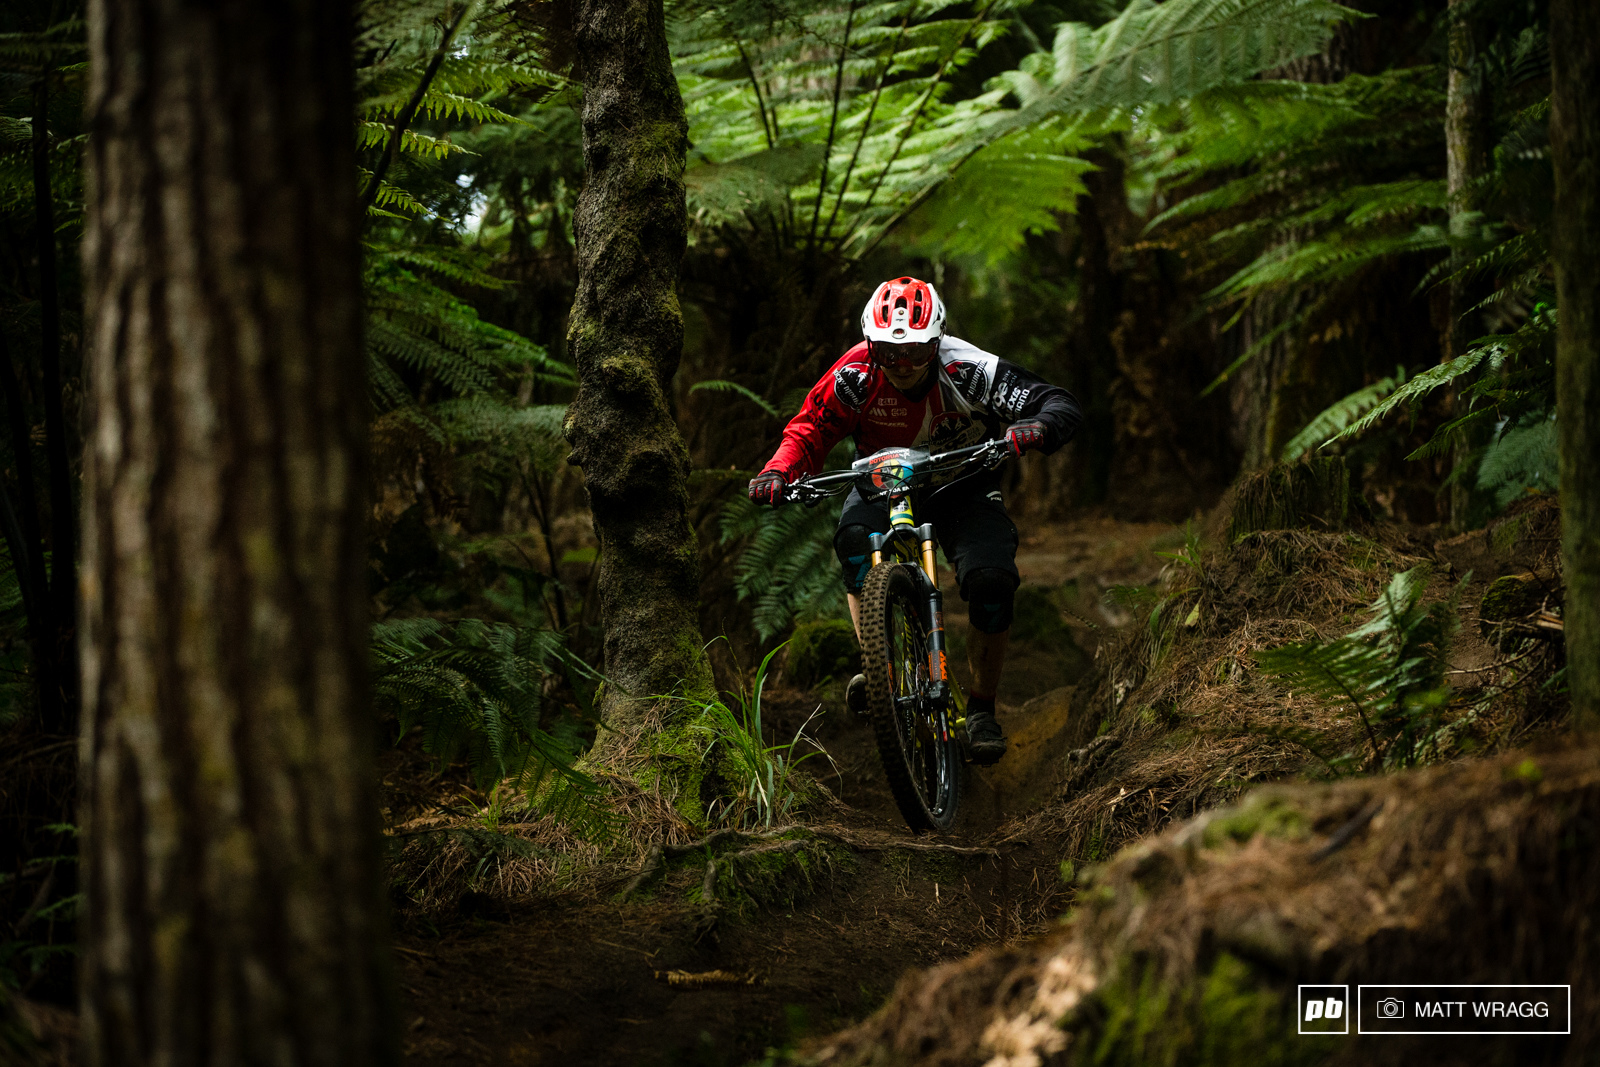 Jesse Melamed has been all business all week, not more sketchy hucking for the cameras, it seems. Over the winter he has been putting in the work on his fitness and he narrowly missed out on a top 20 today.